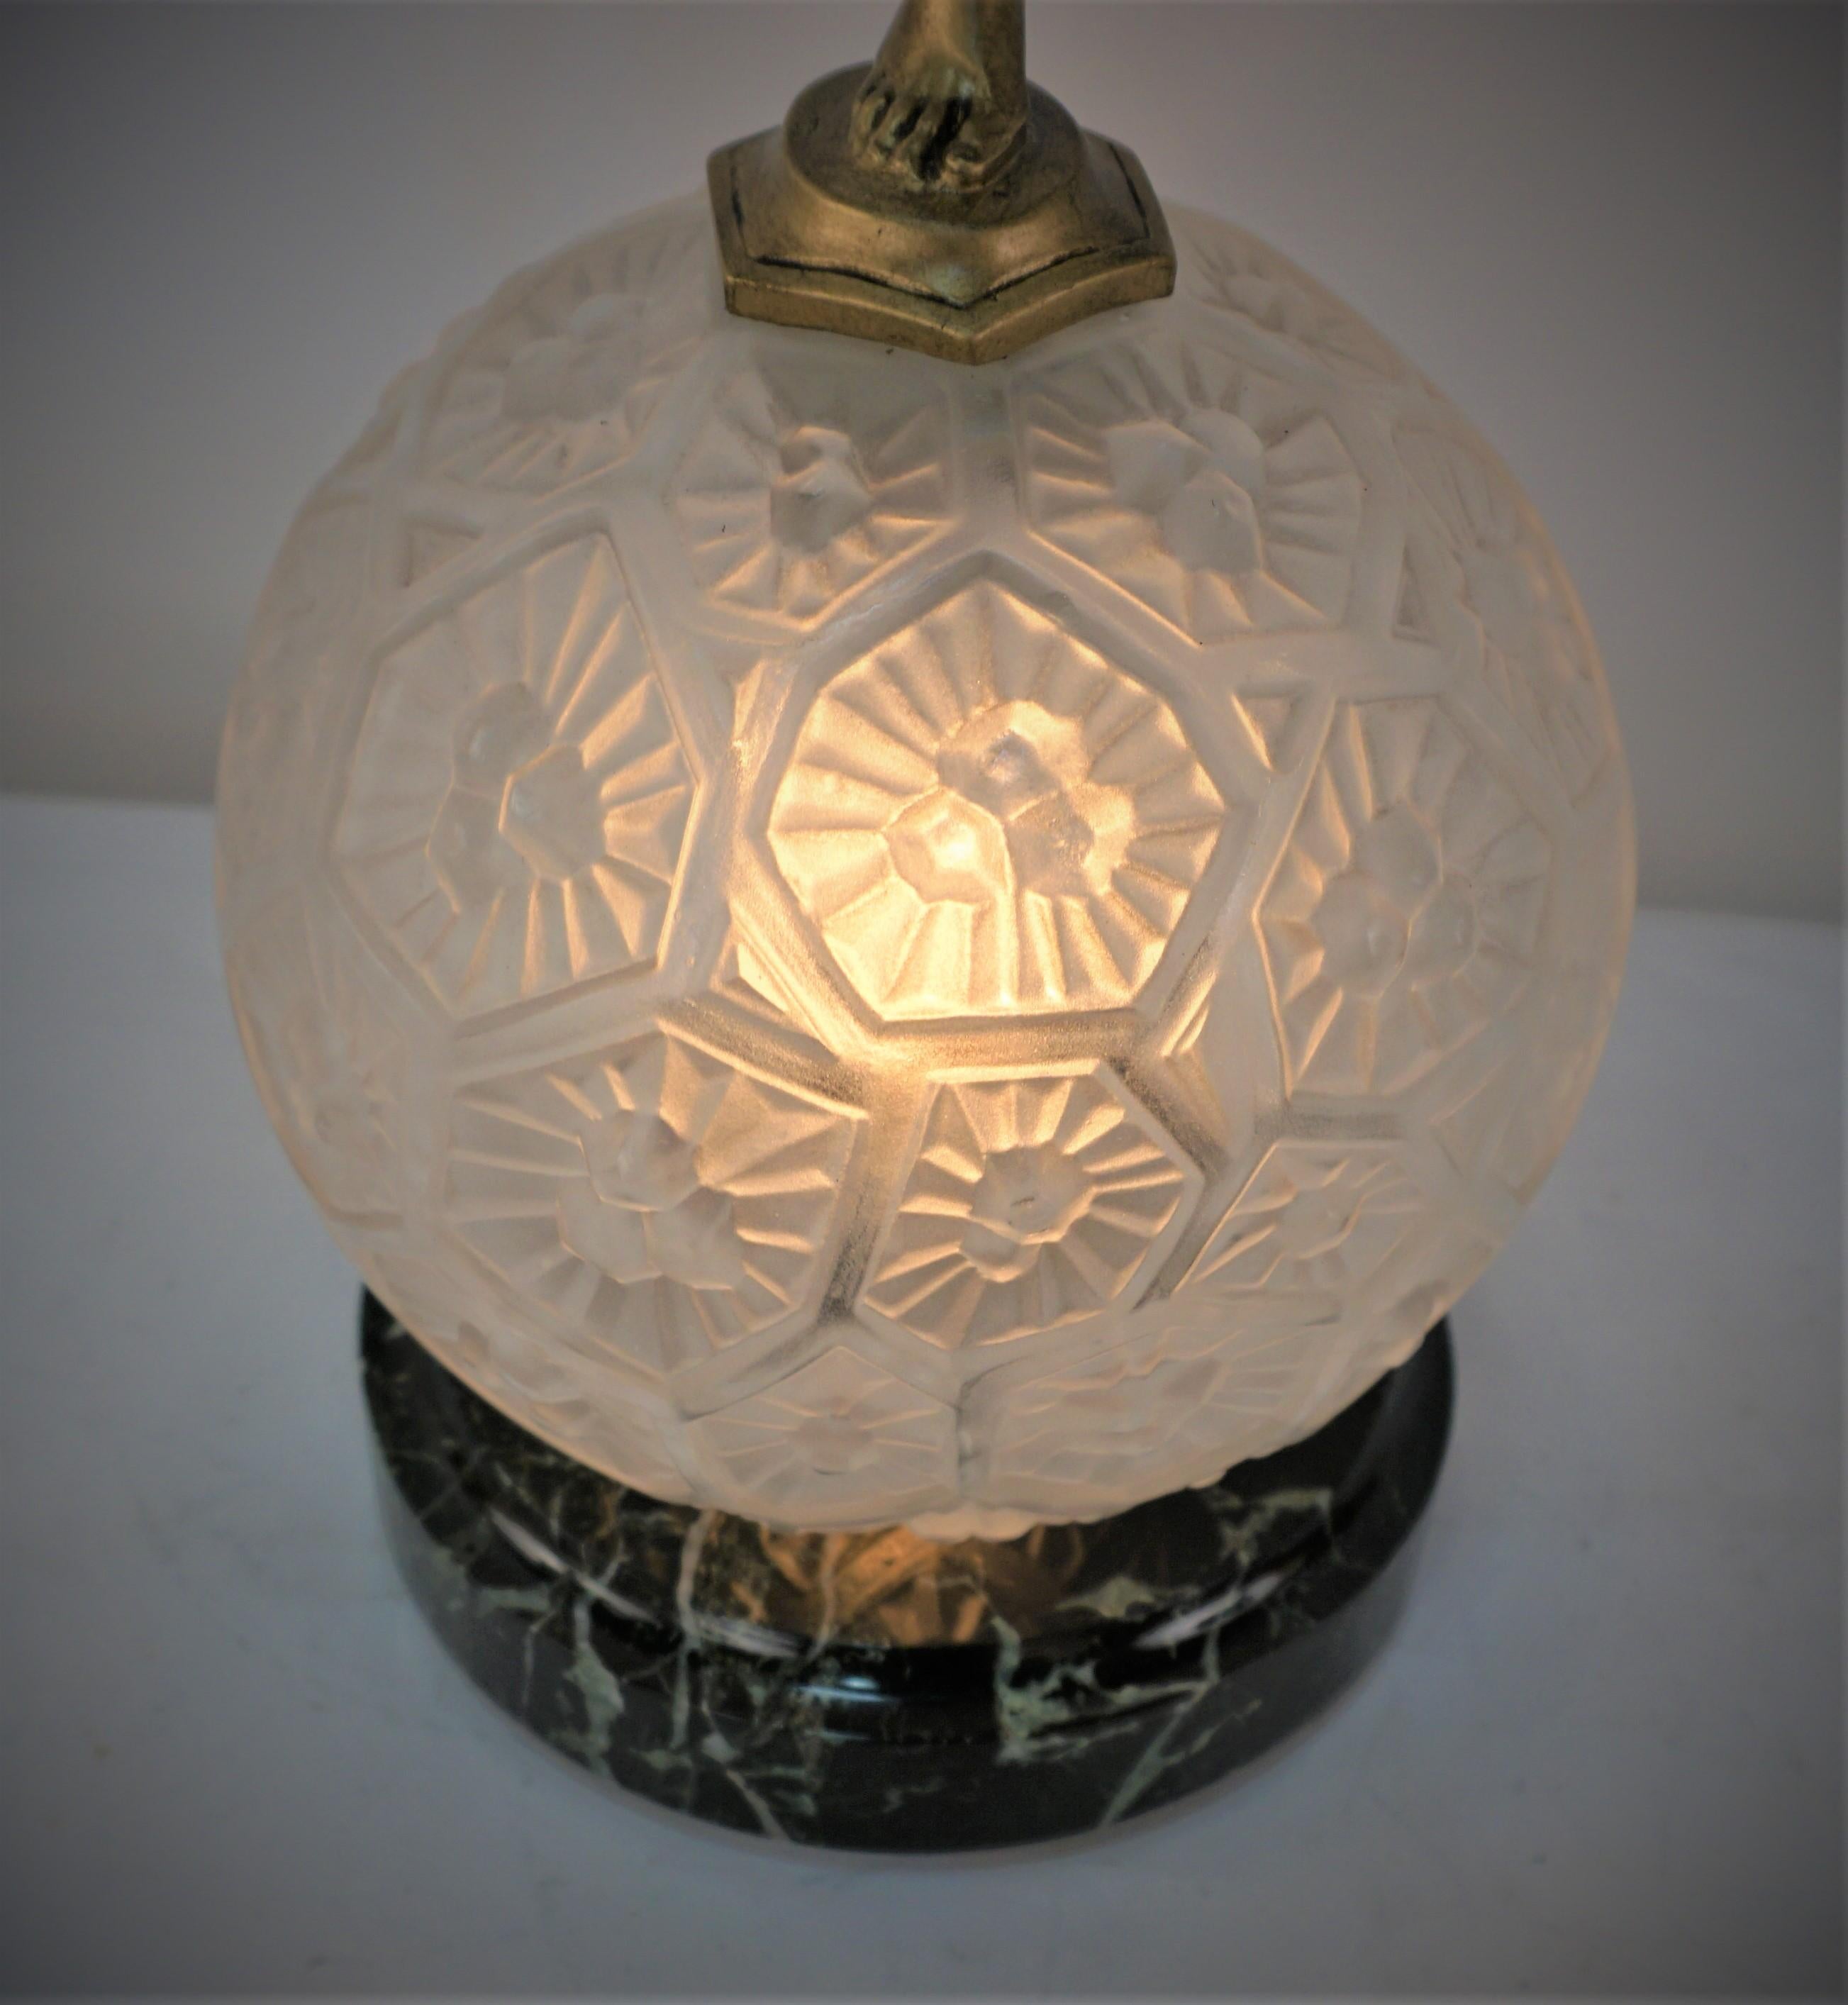 Sculpture of runner on geometric flora glass globe shade with marble base.